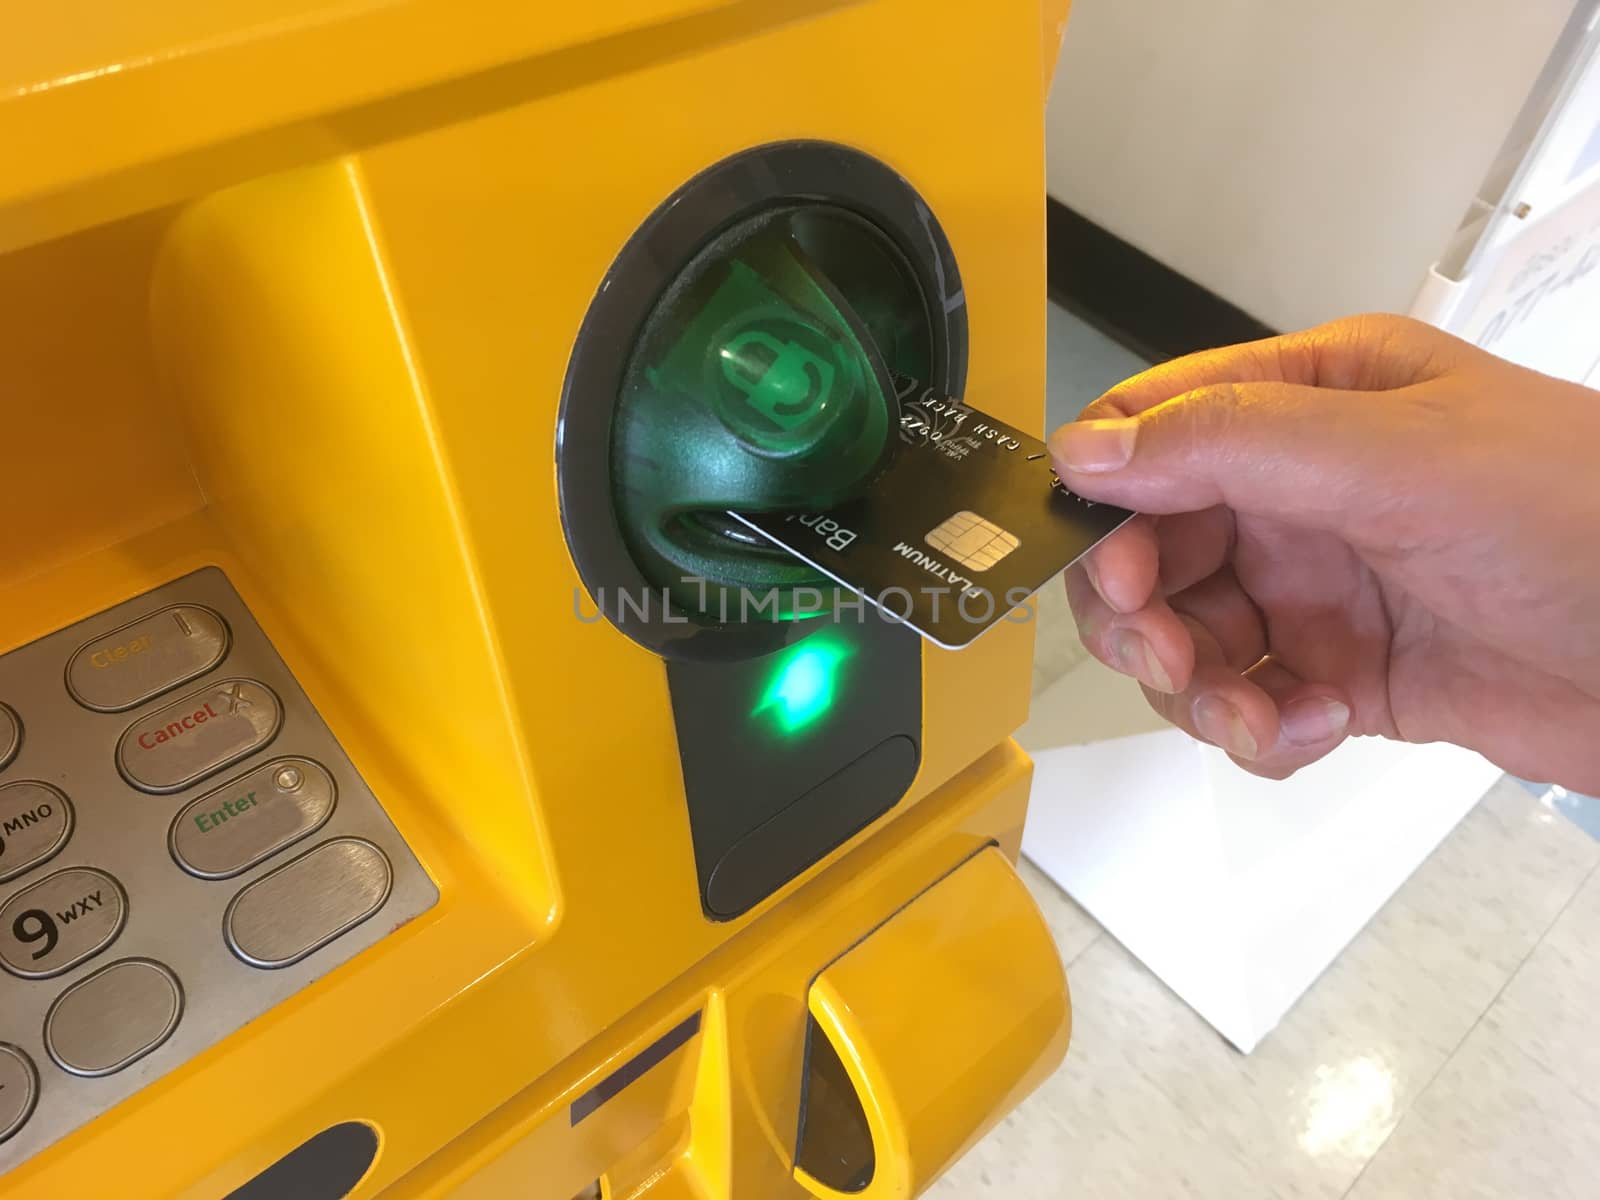 Closeup of hand inserting ATM card in bank machine for withdrawing money.